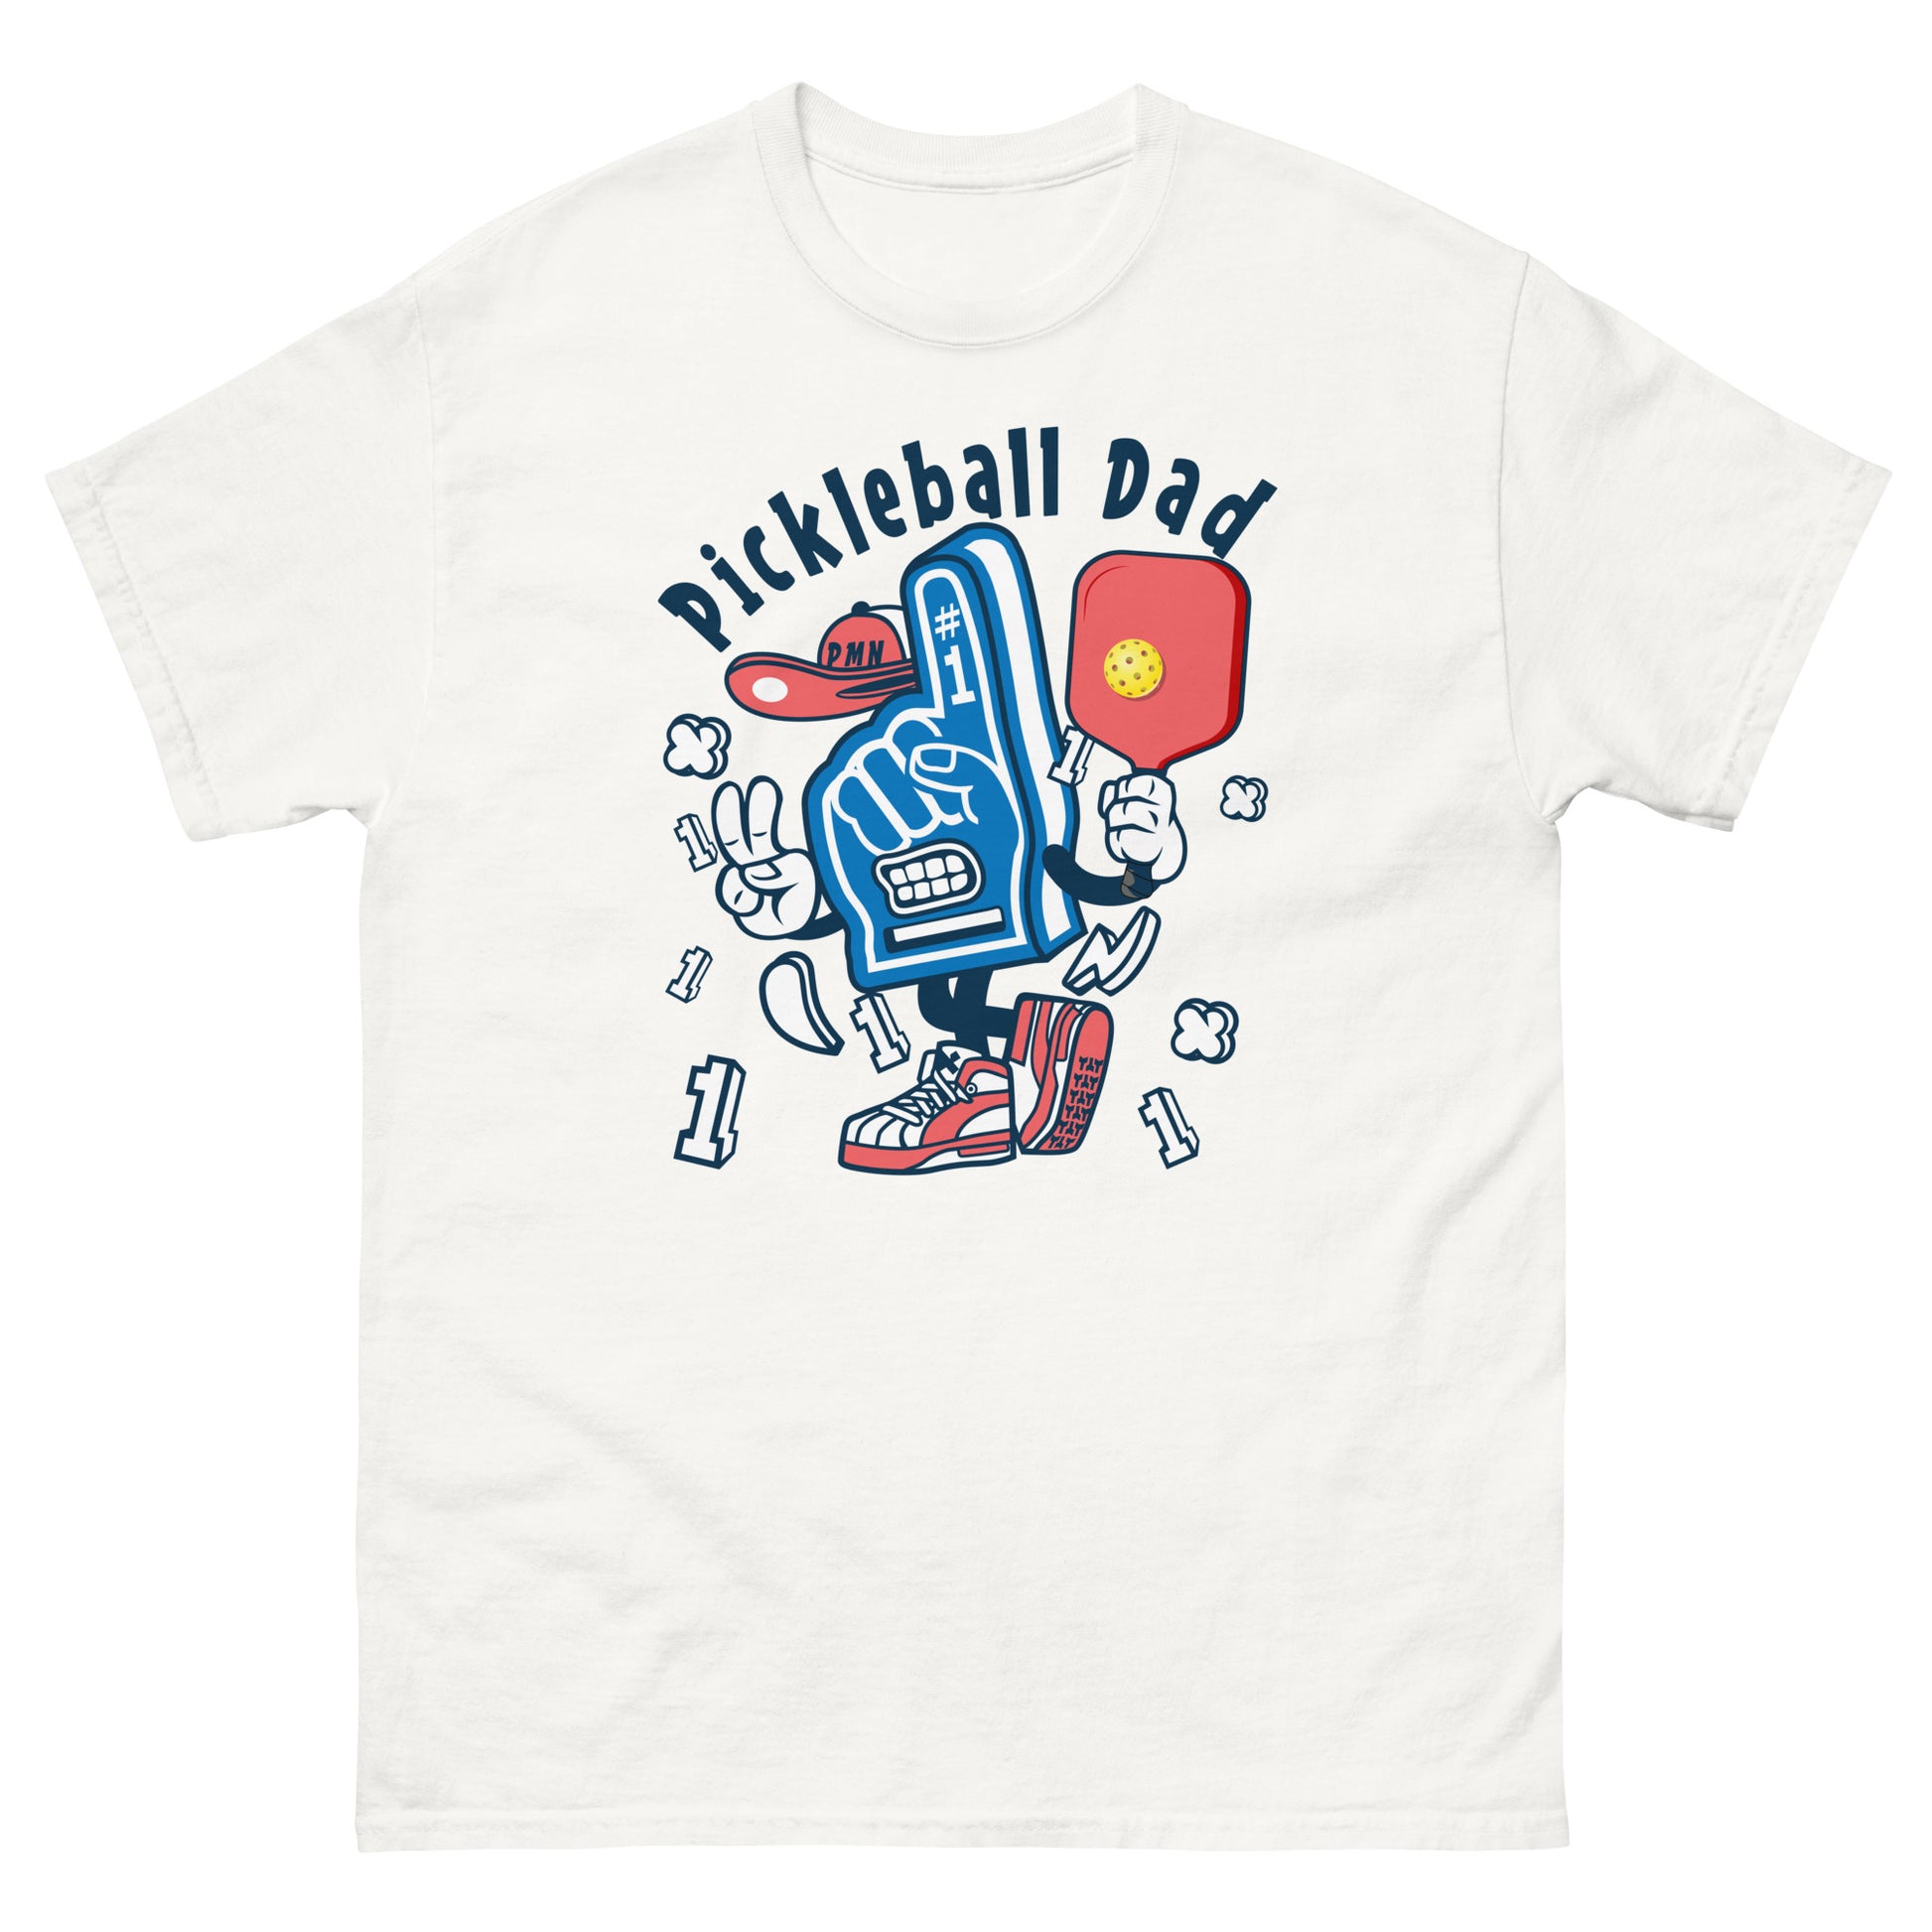 Retro Pickleball Pun: "Number One Pickleball Dad Glove", Father's Day Mens White T-Shirt